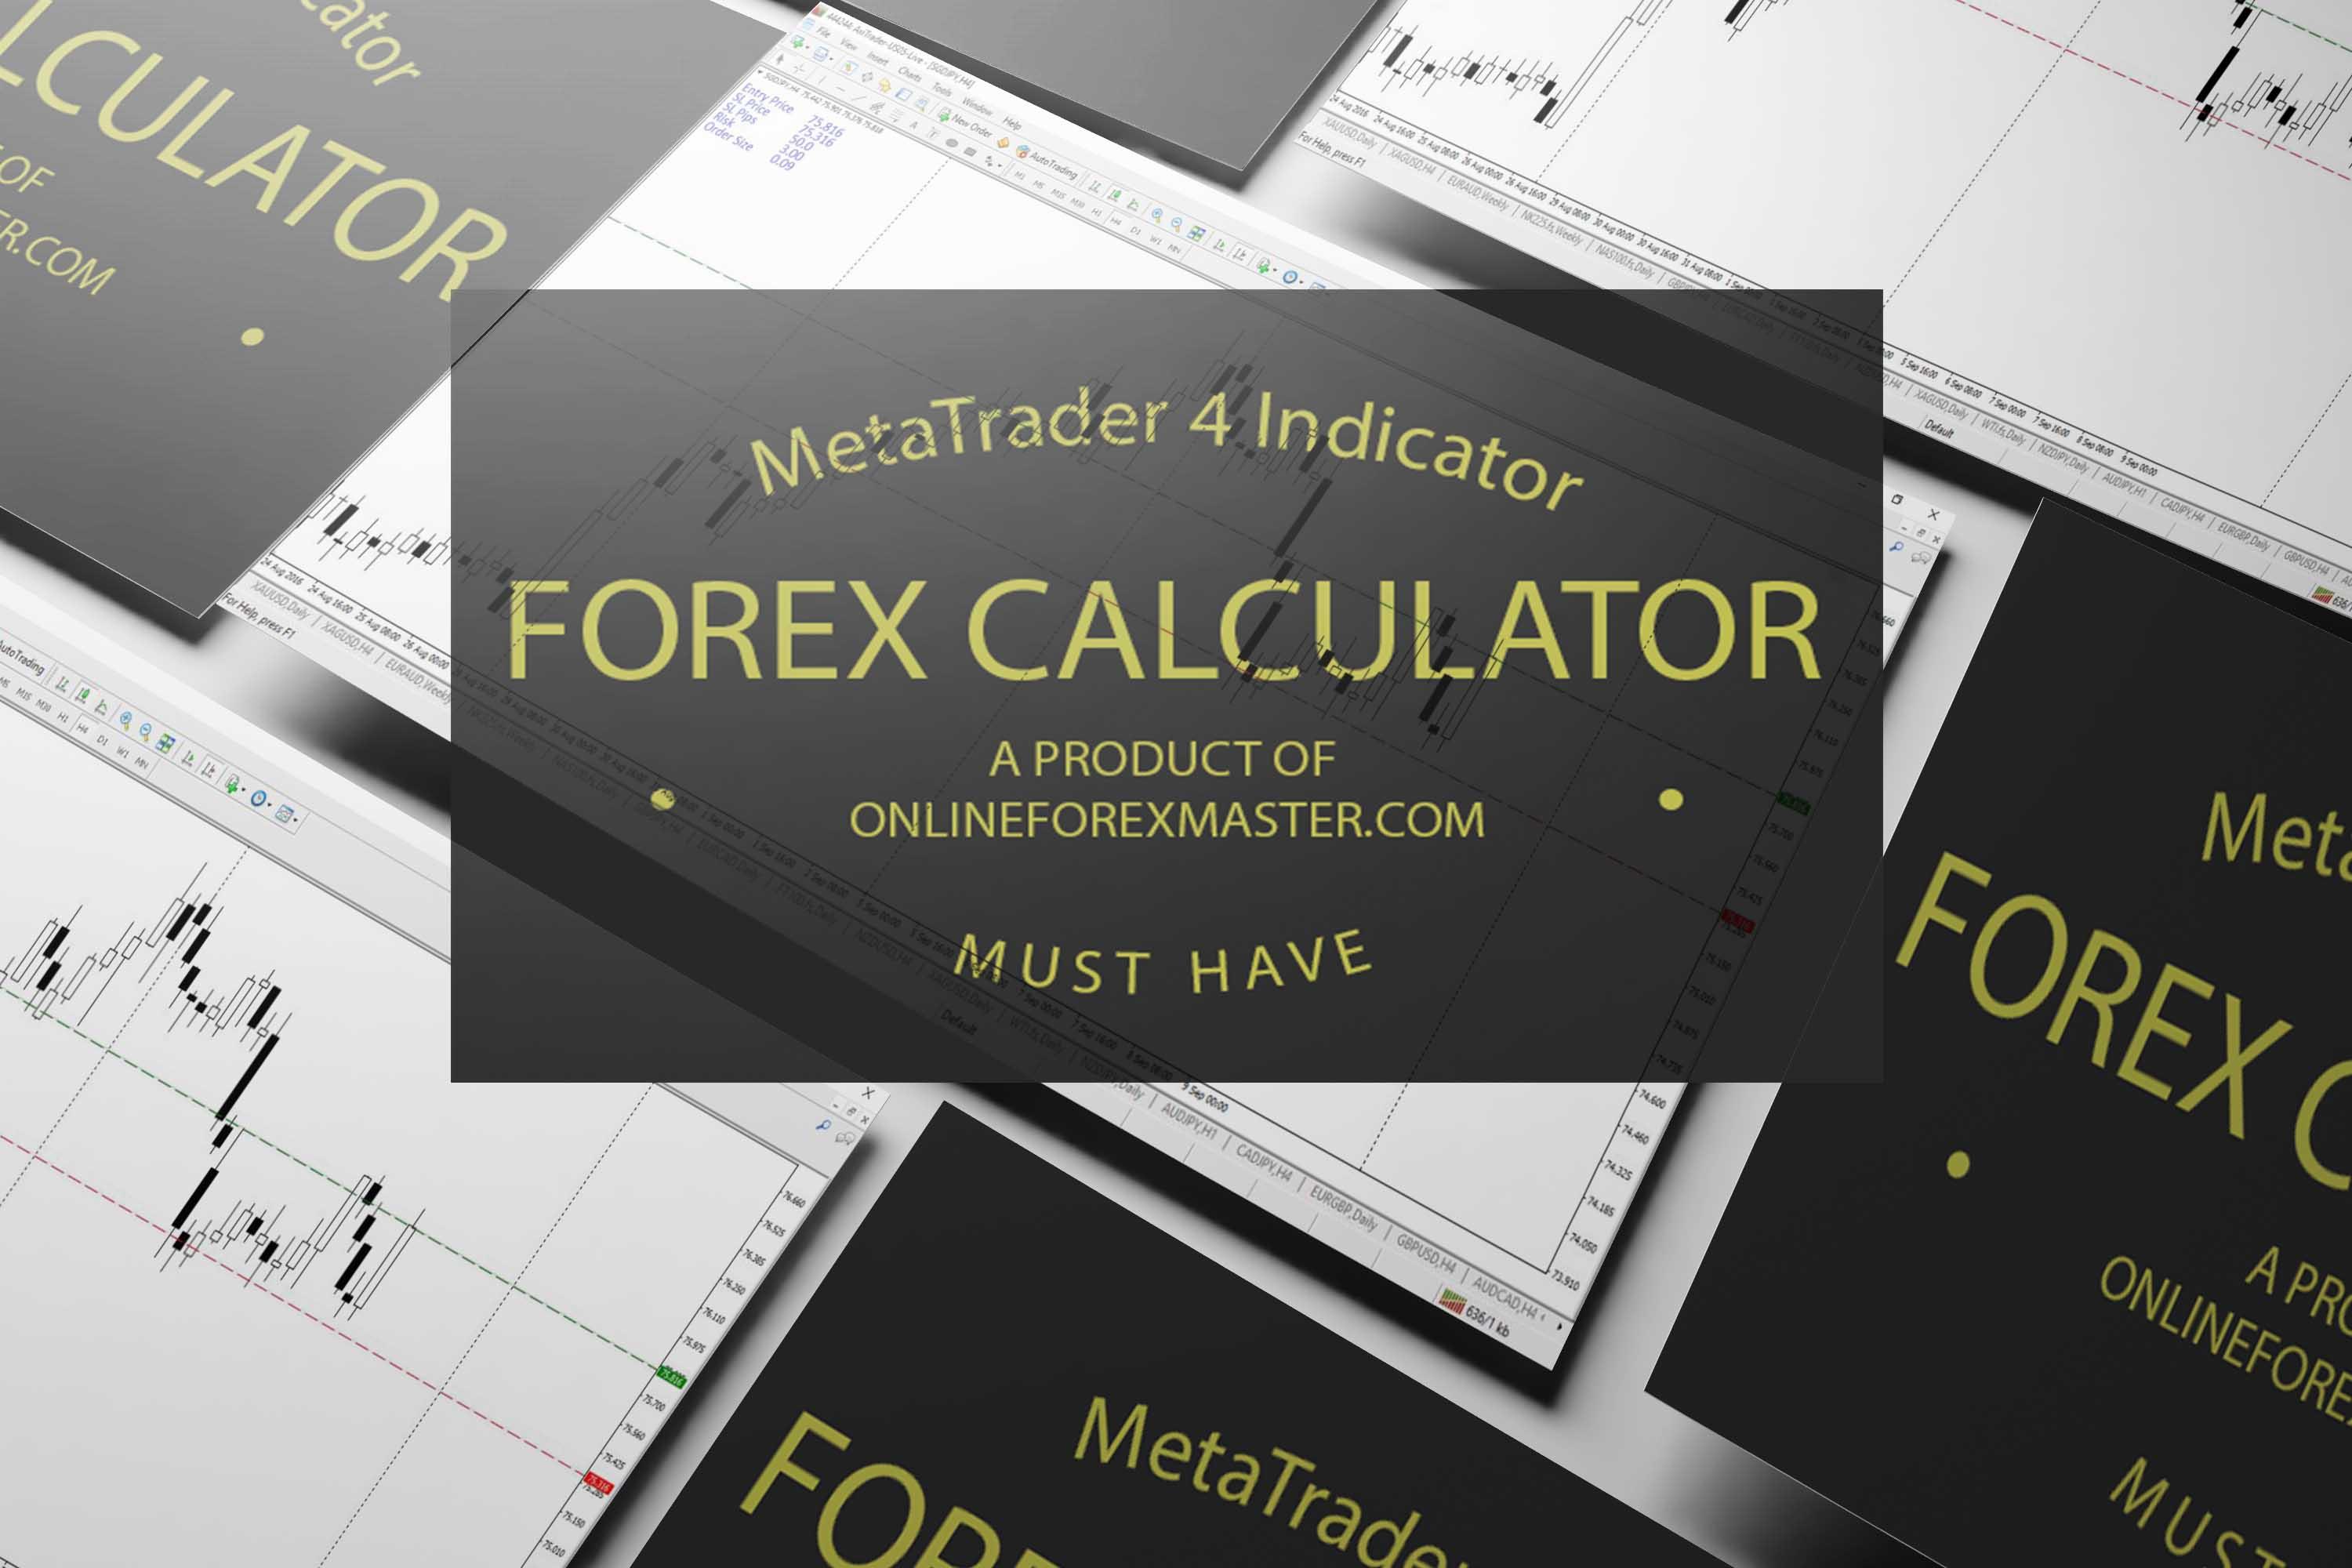 Forex masters course